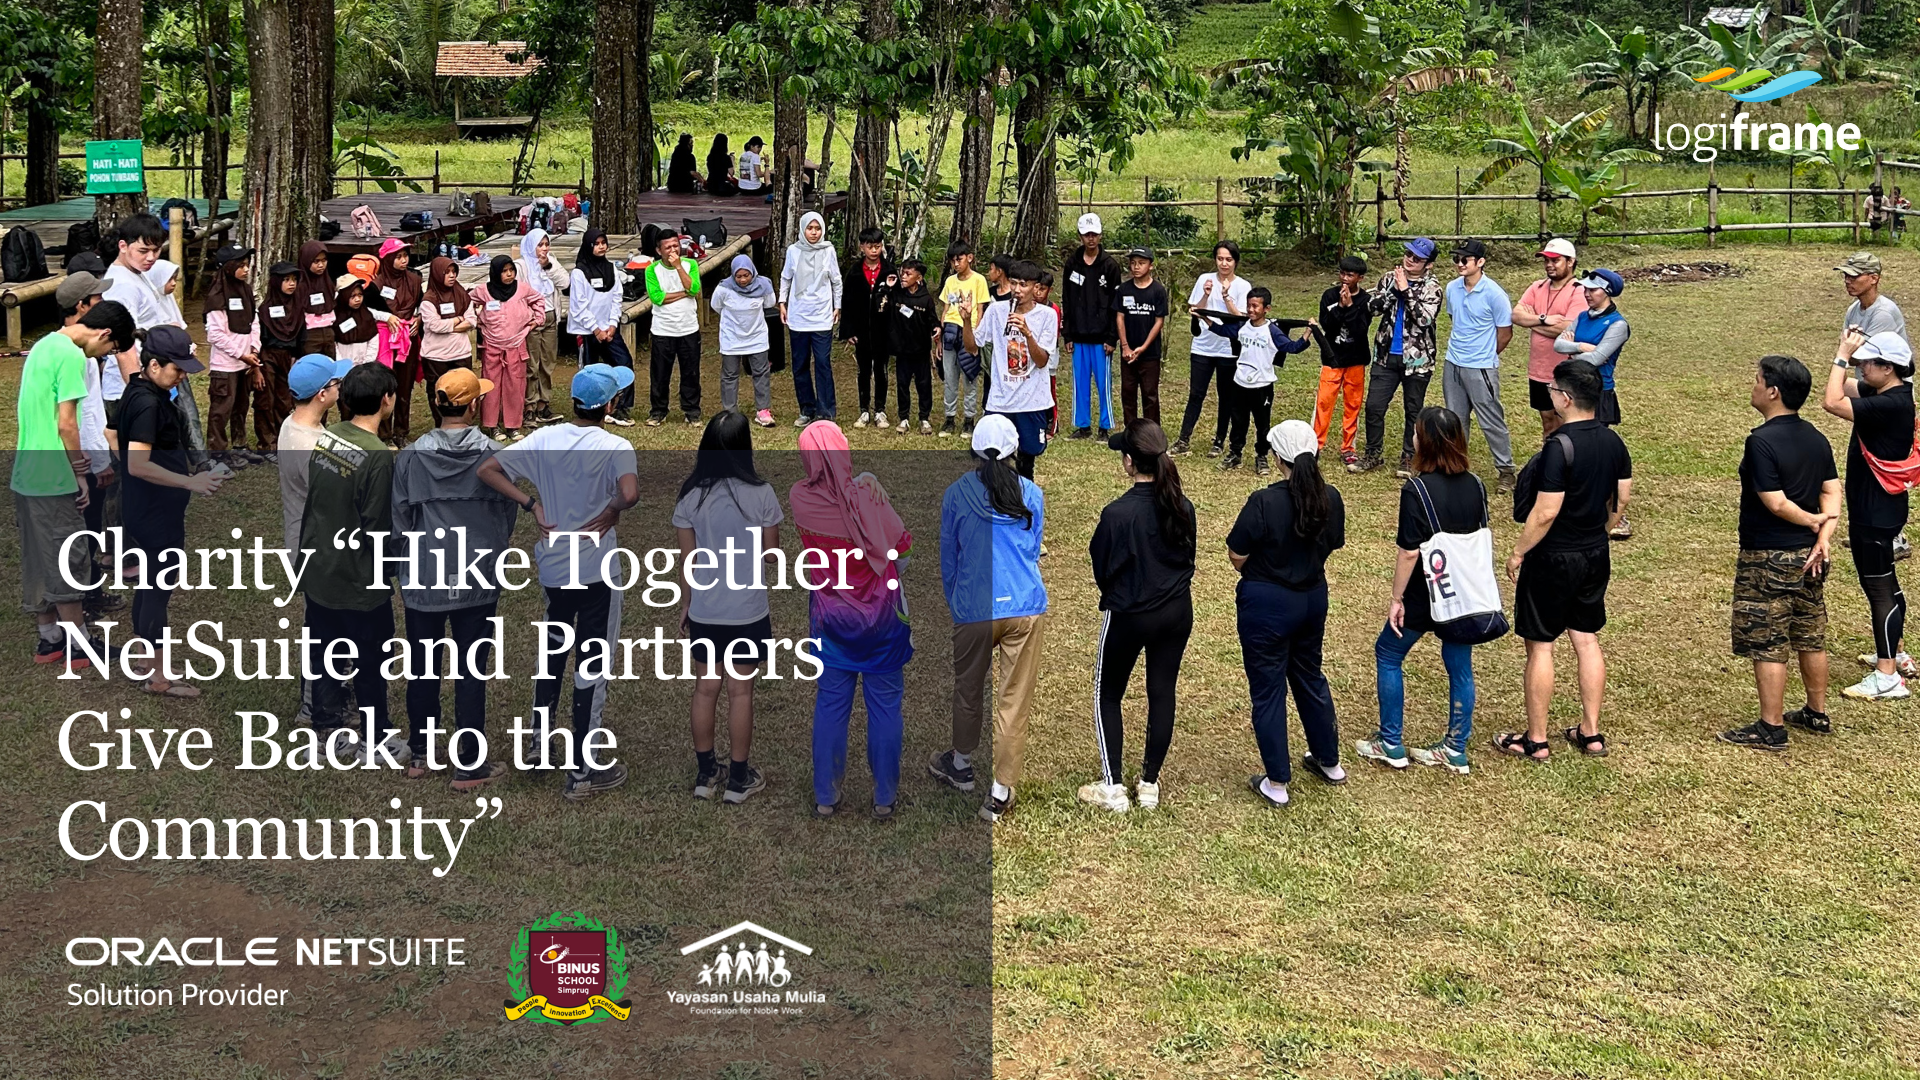 Charity “Hike Together _ NetSuite and Partners Give Back to the Community”